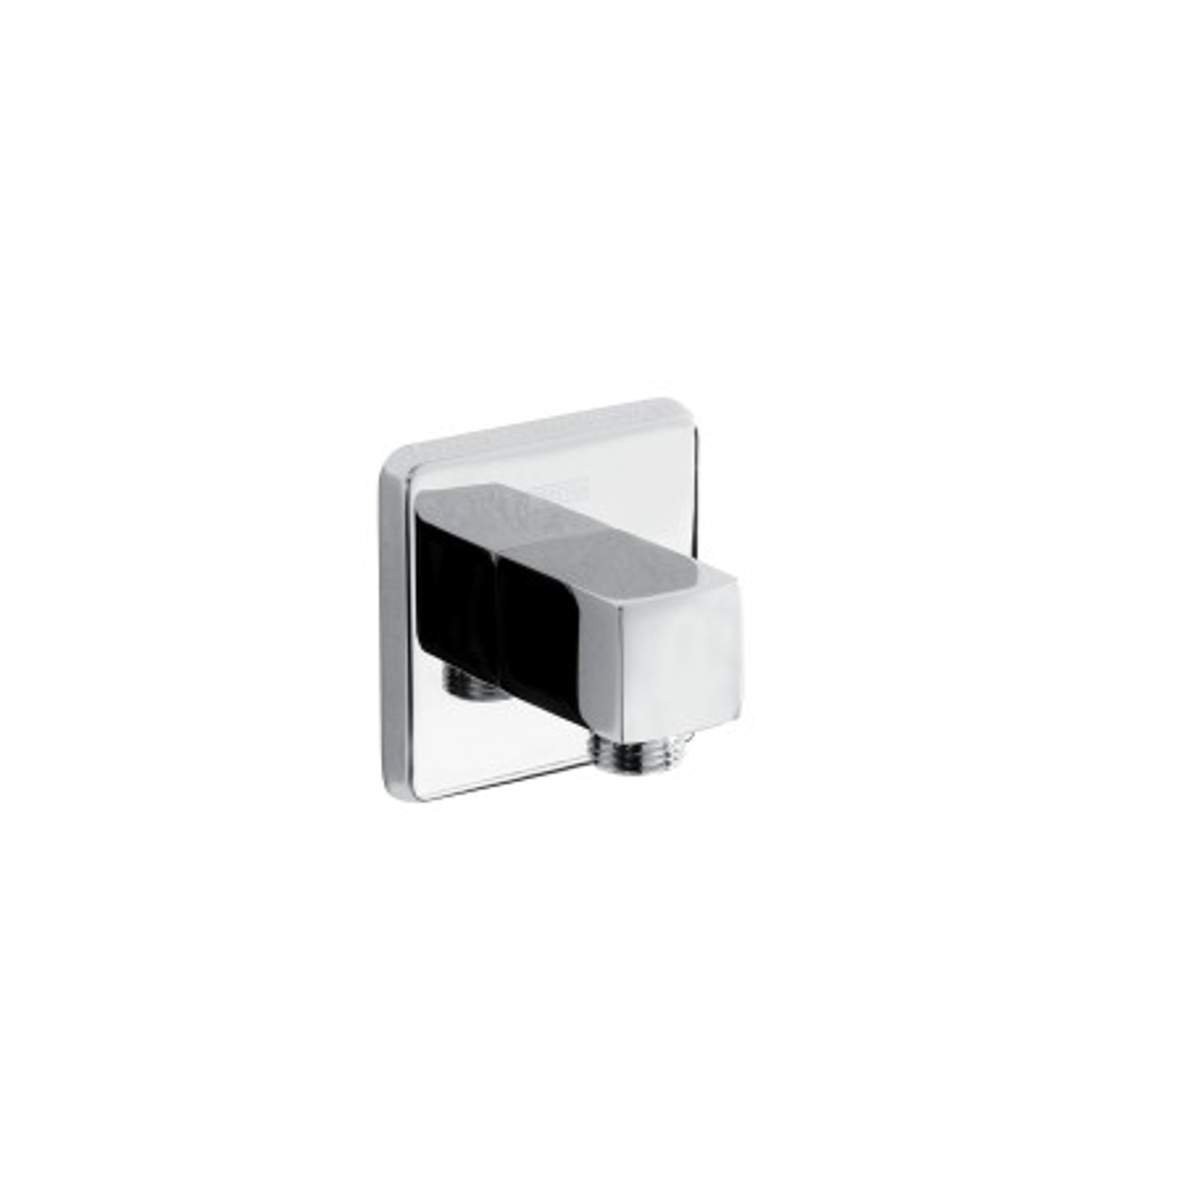 Bristan Square Wall Outlet (CARM WOSQ01 C)